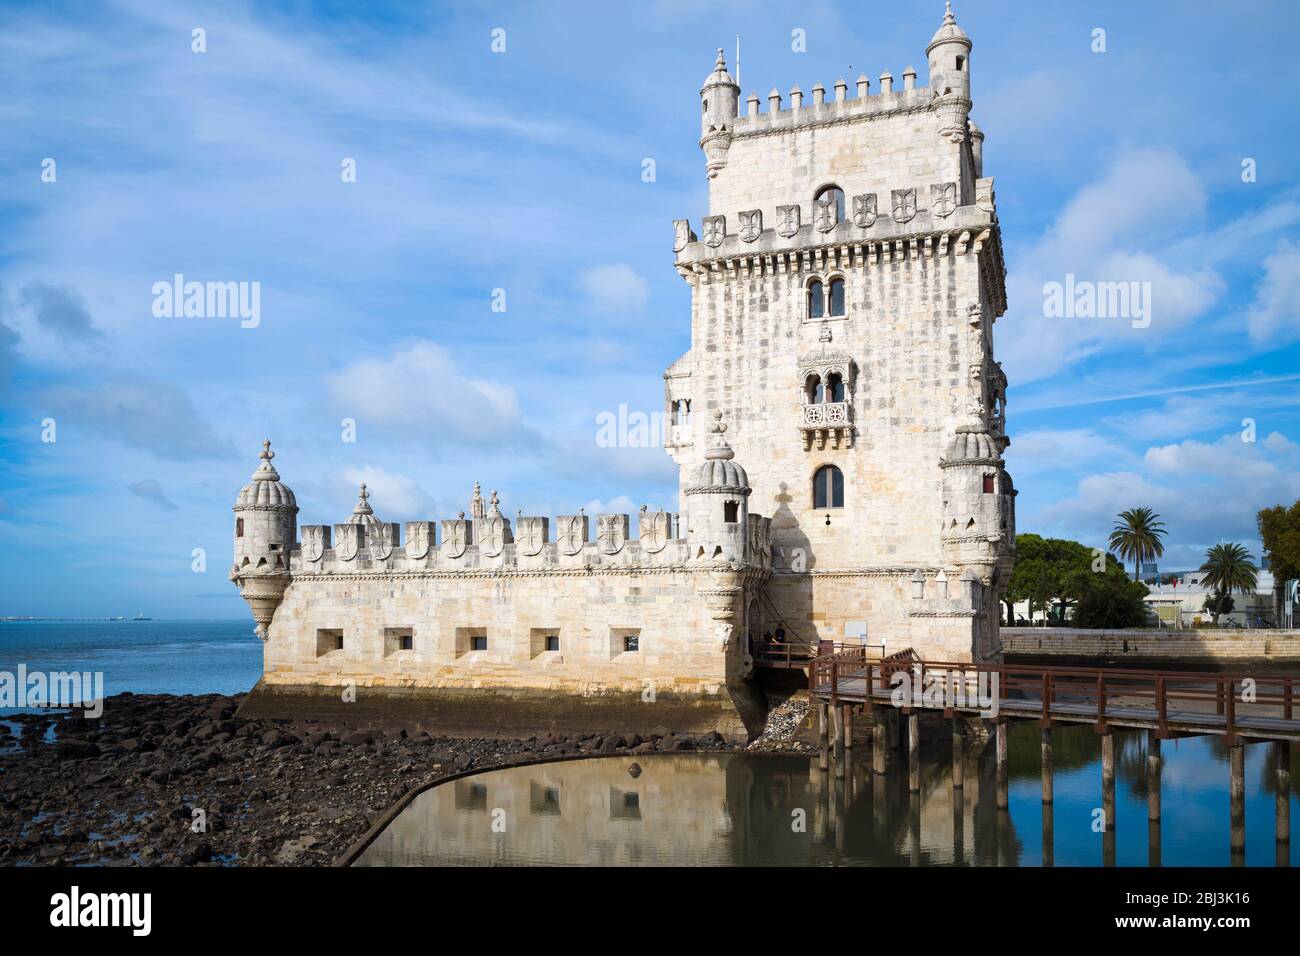 Belem Tower - the Tower of Saint Vincent is a 16th-century fortification and gateway to Lisbon, Portugal Stock Photo